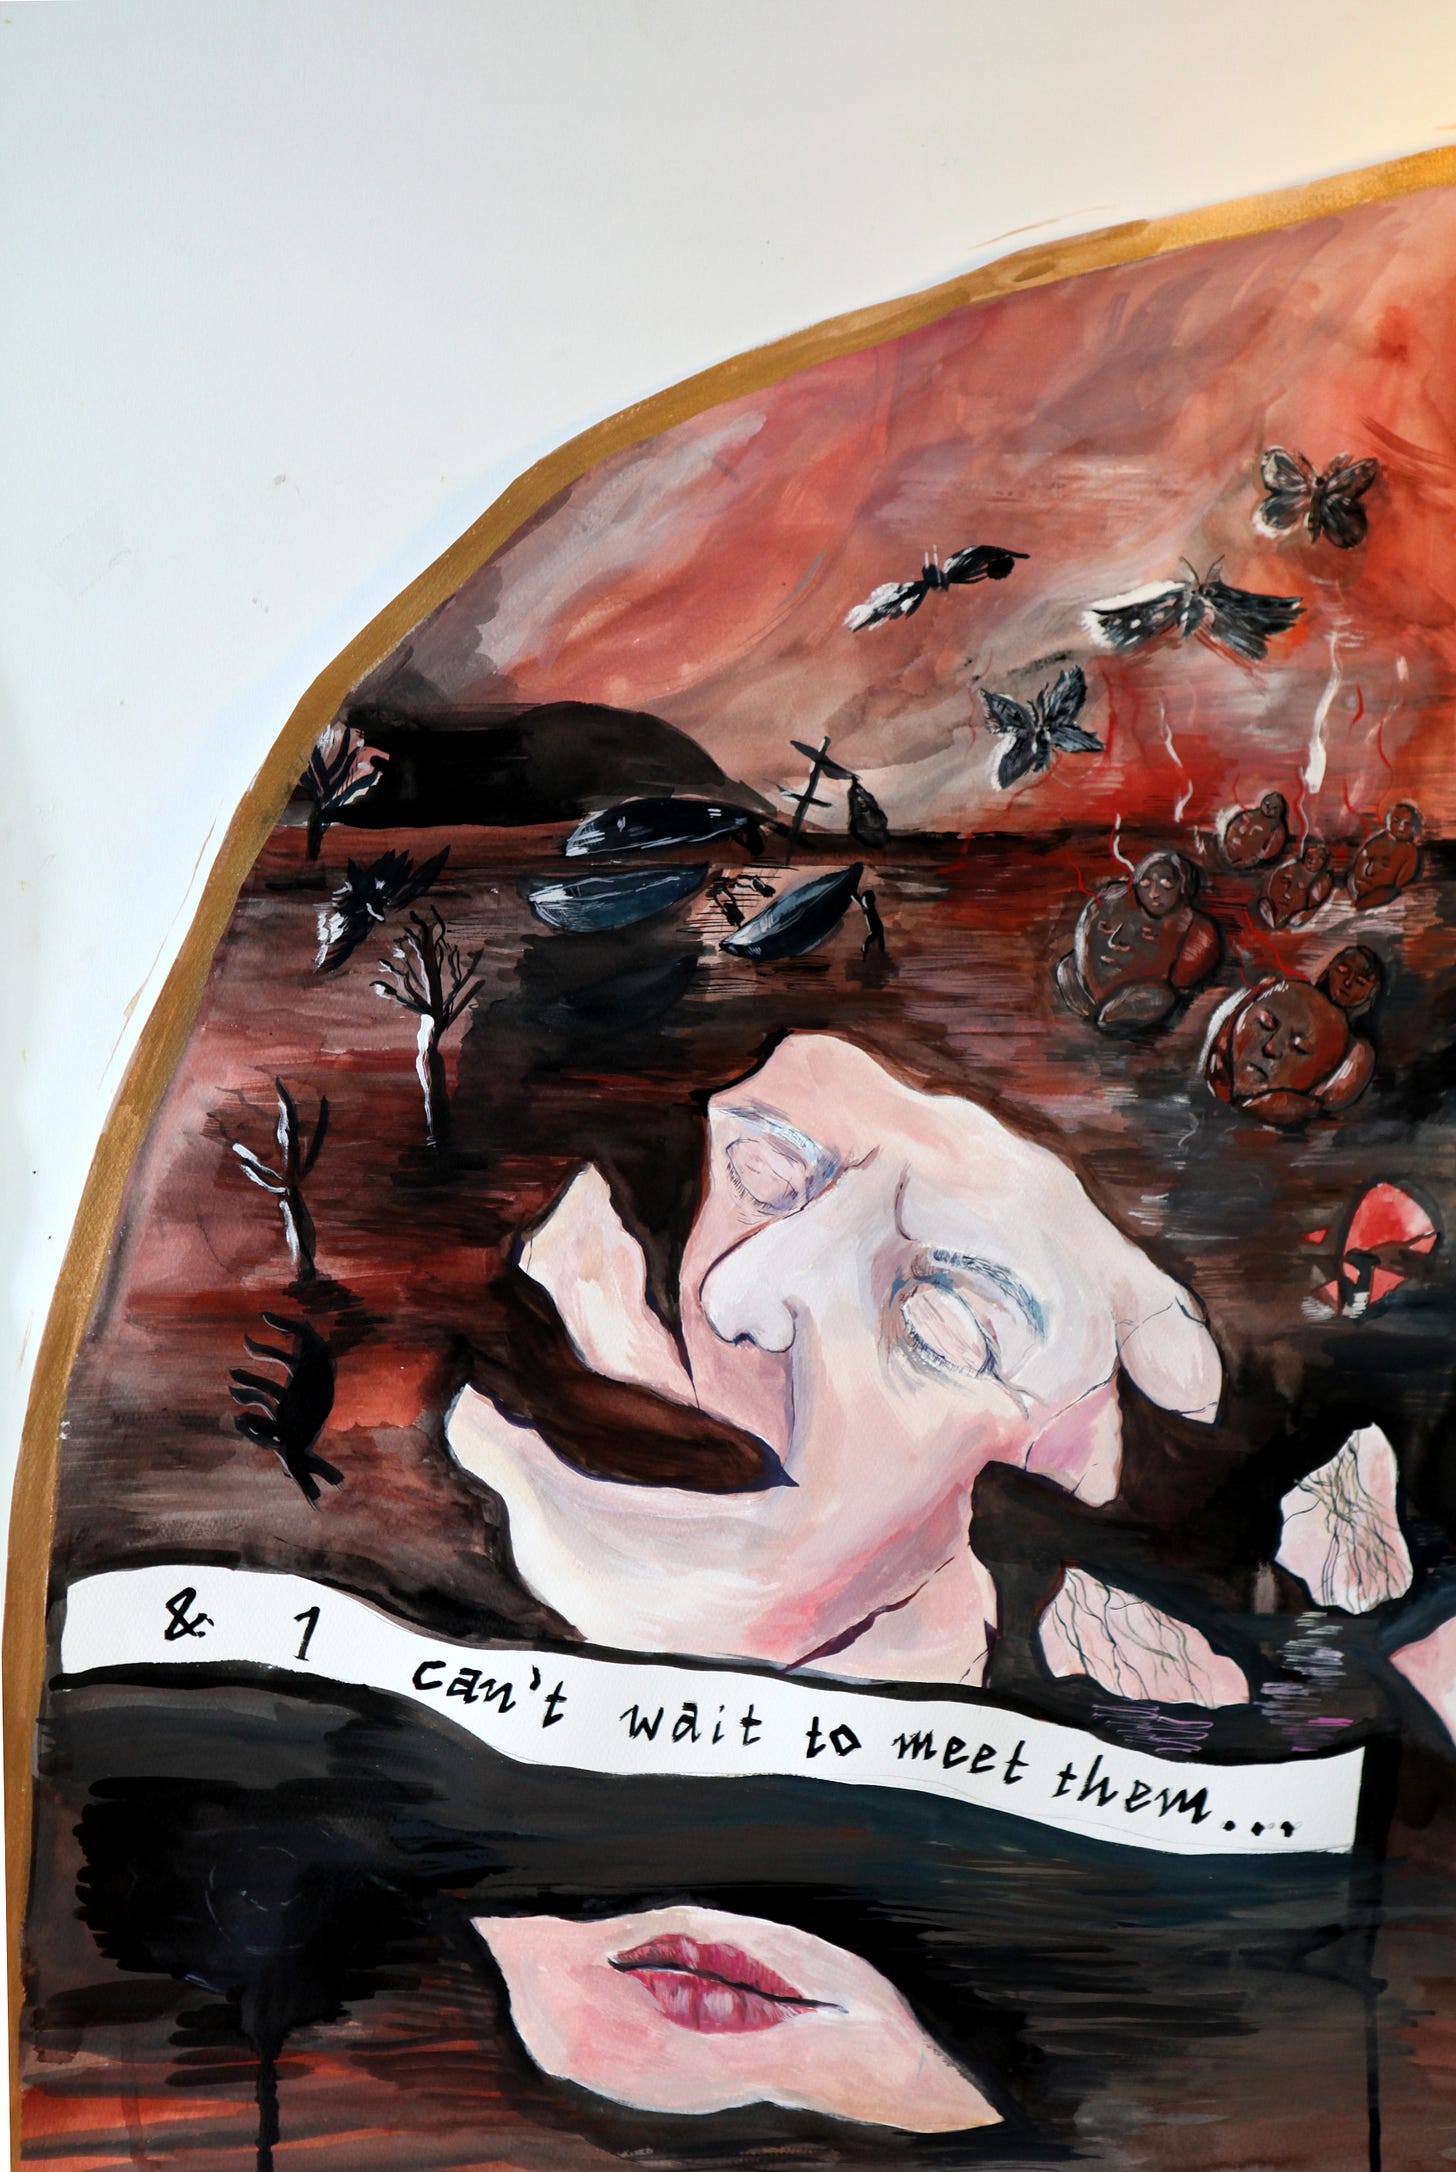 Third part of triptych: apocalyptic scene with skin flaking off old face, black moths, roasted chickens with heads on their stomach, with the text '& I can't wait to meet them ... '